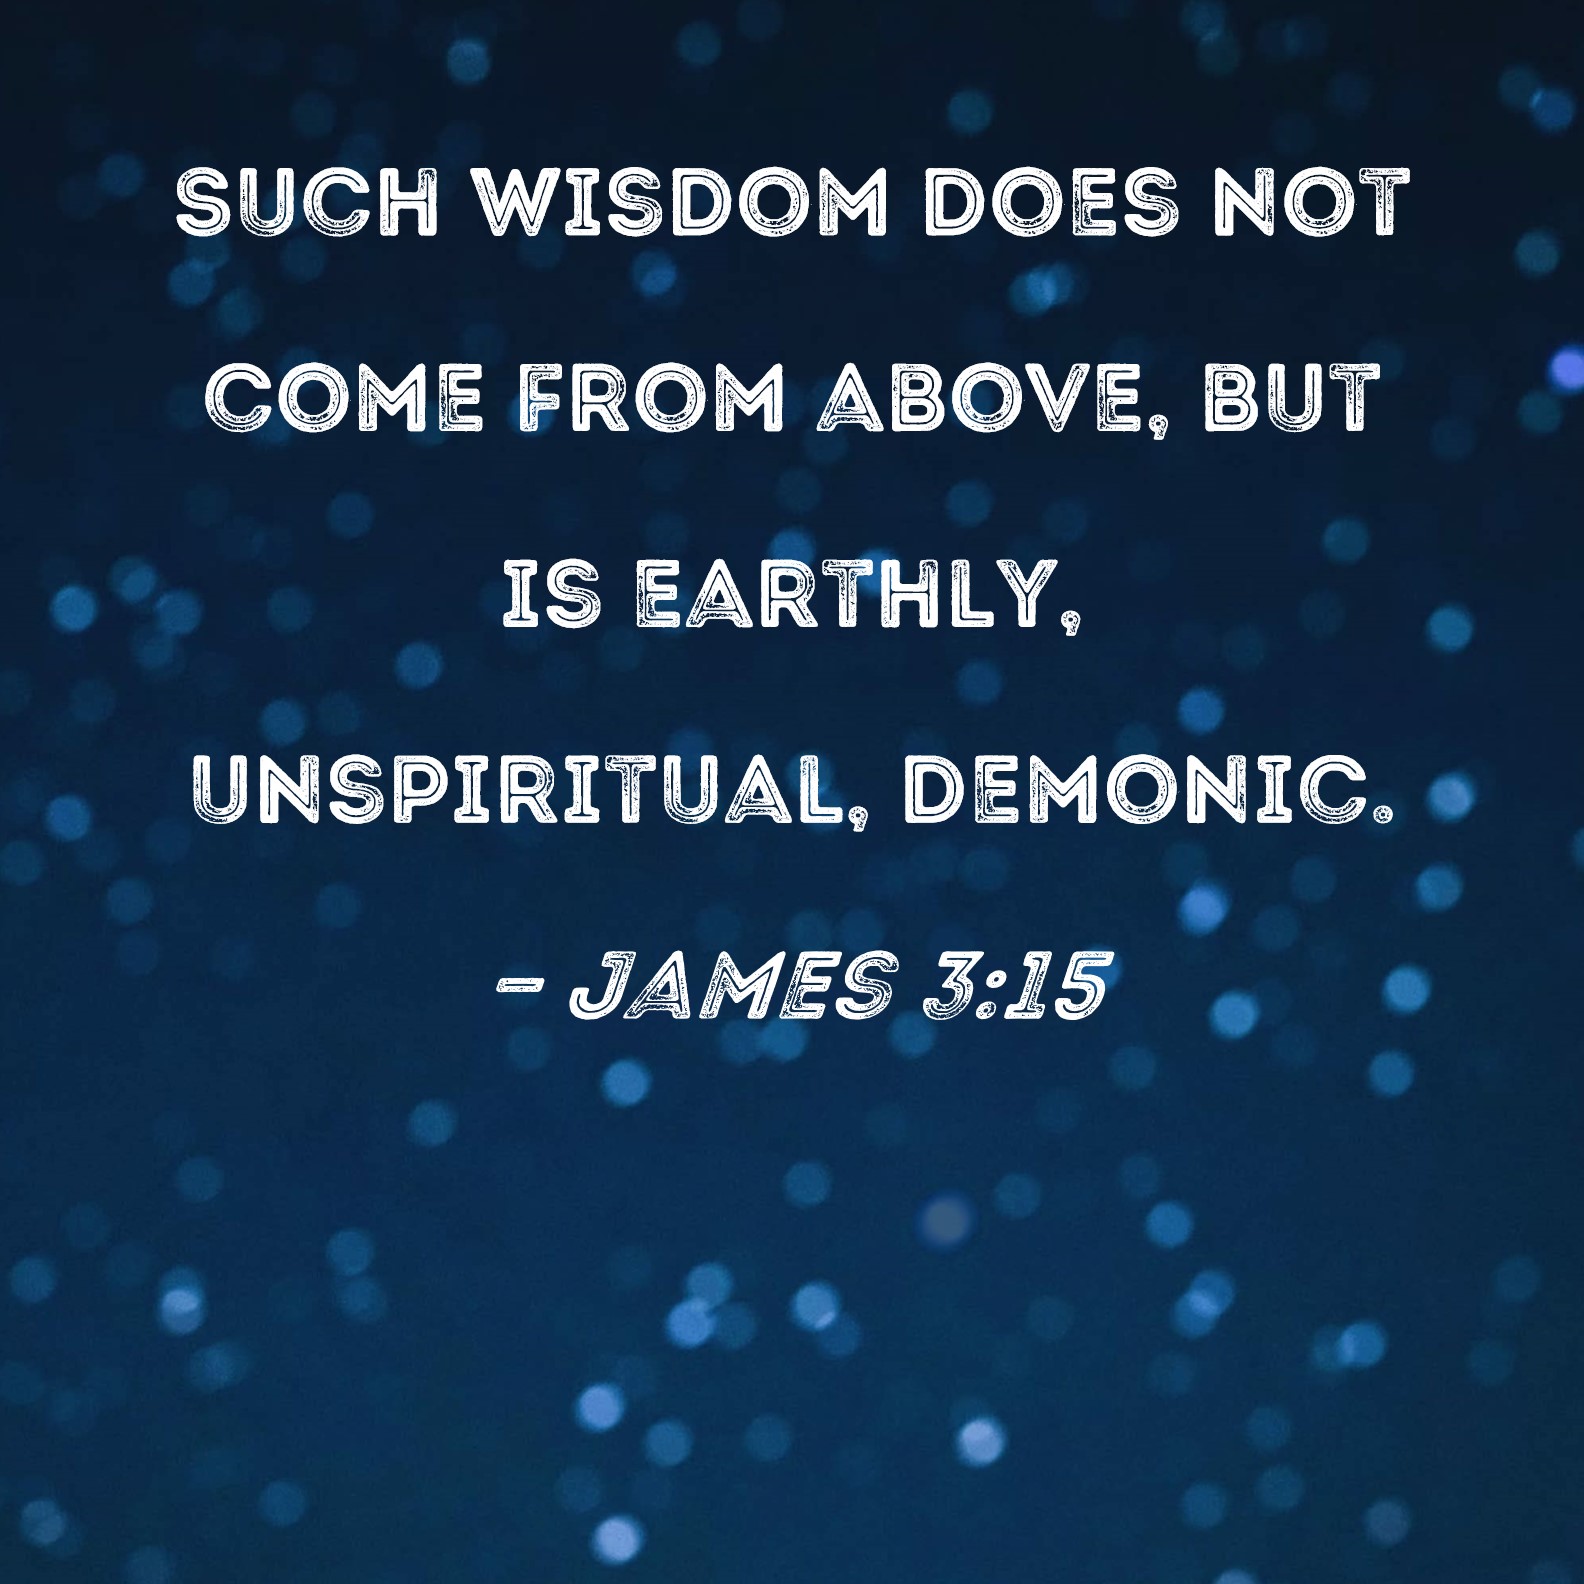 James 3:15 Such wisdom does not come from above, but is earthly,  unspiritual, demonic.